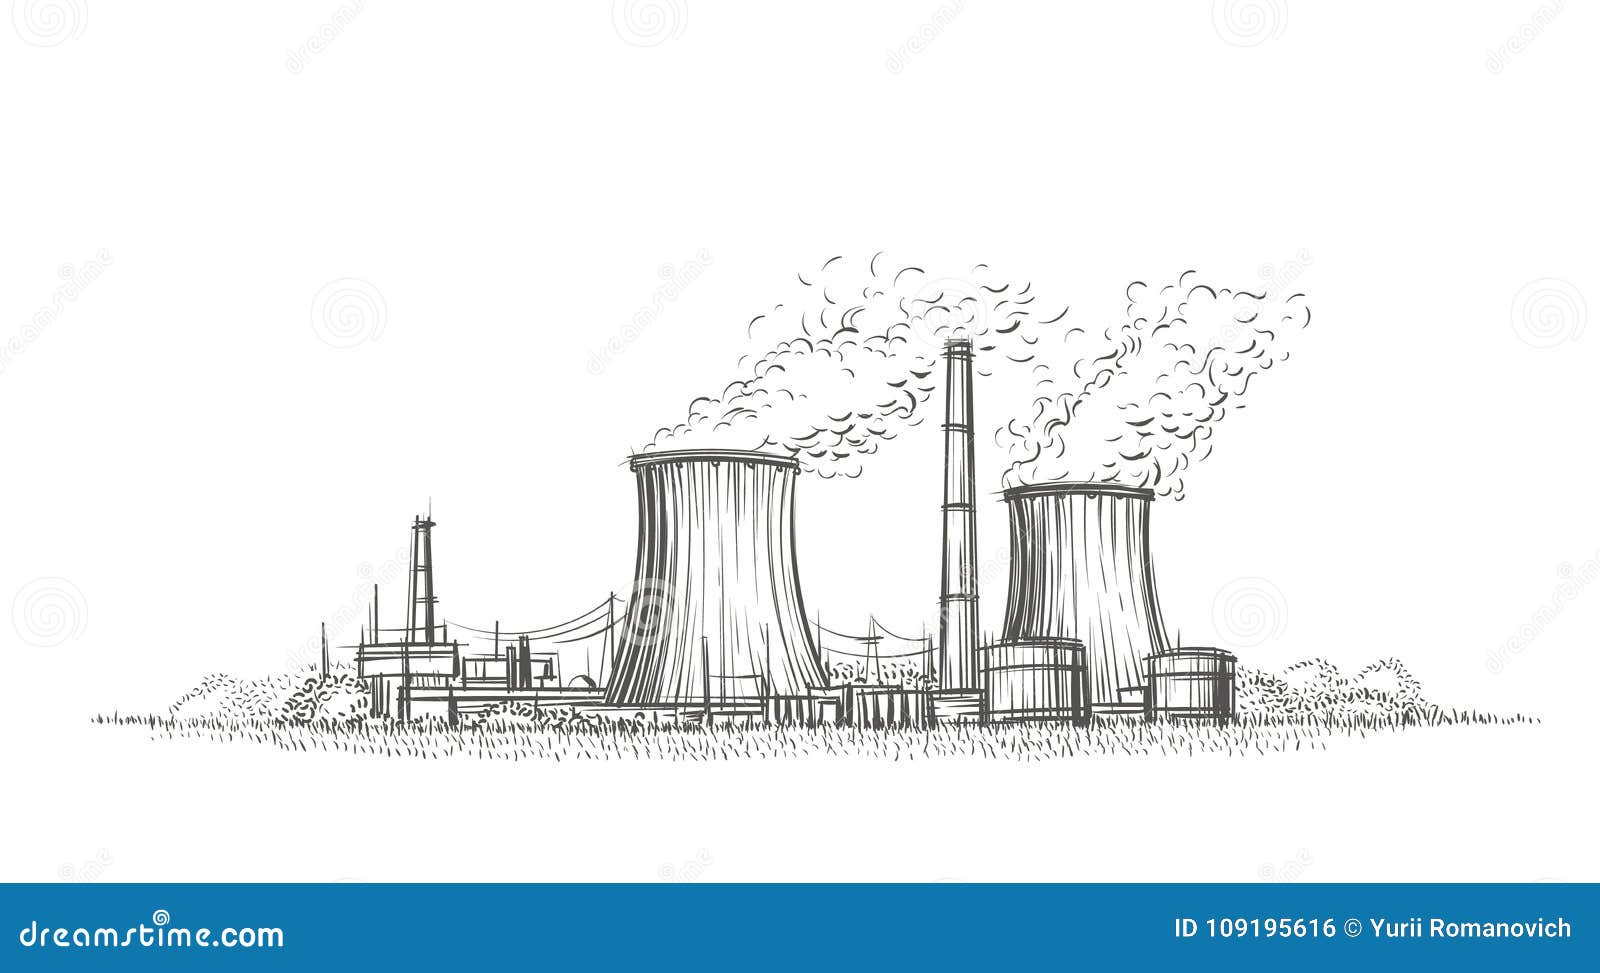 Nuclear Power Plant Hand Drawn Sketch. Vector. Stock Vector